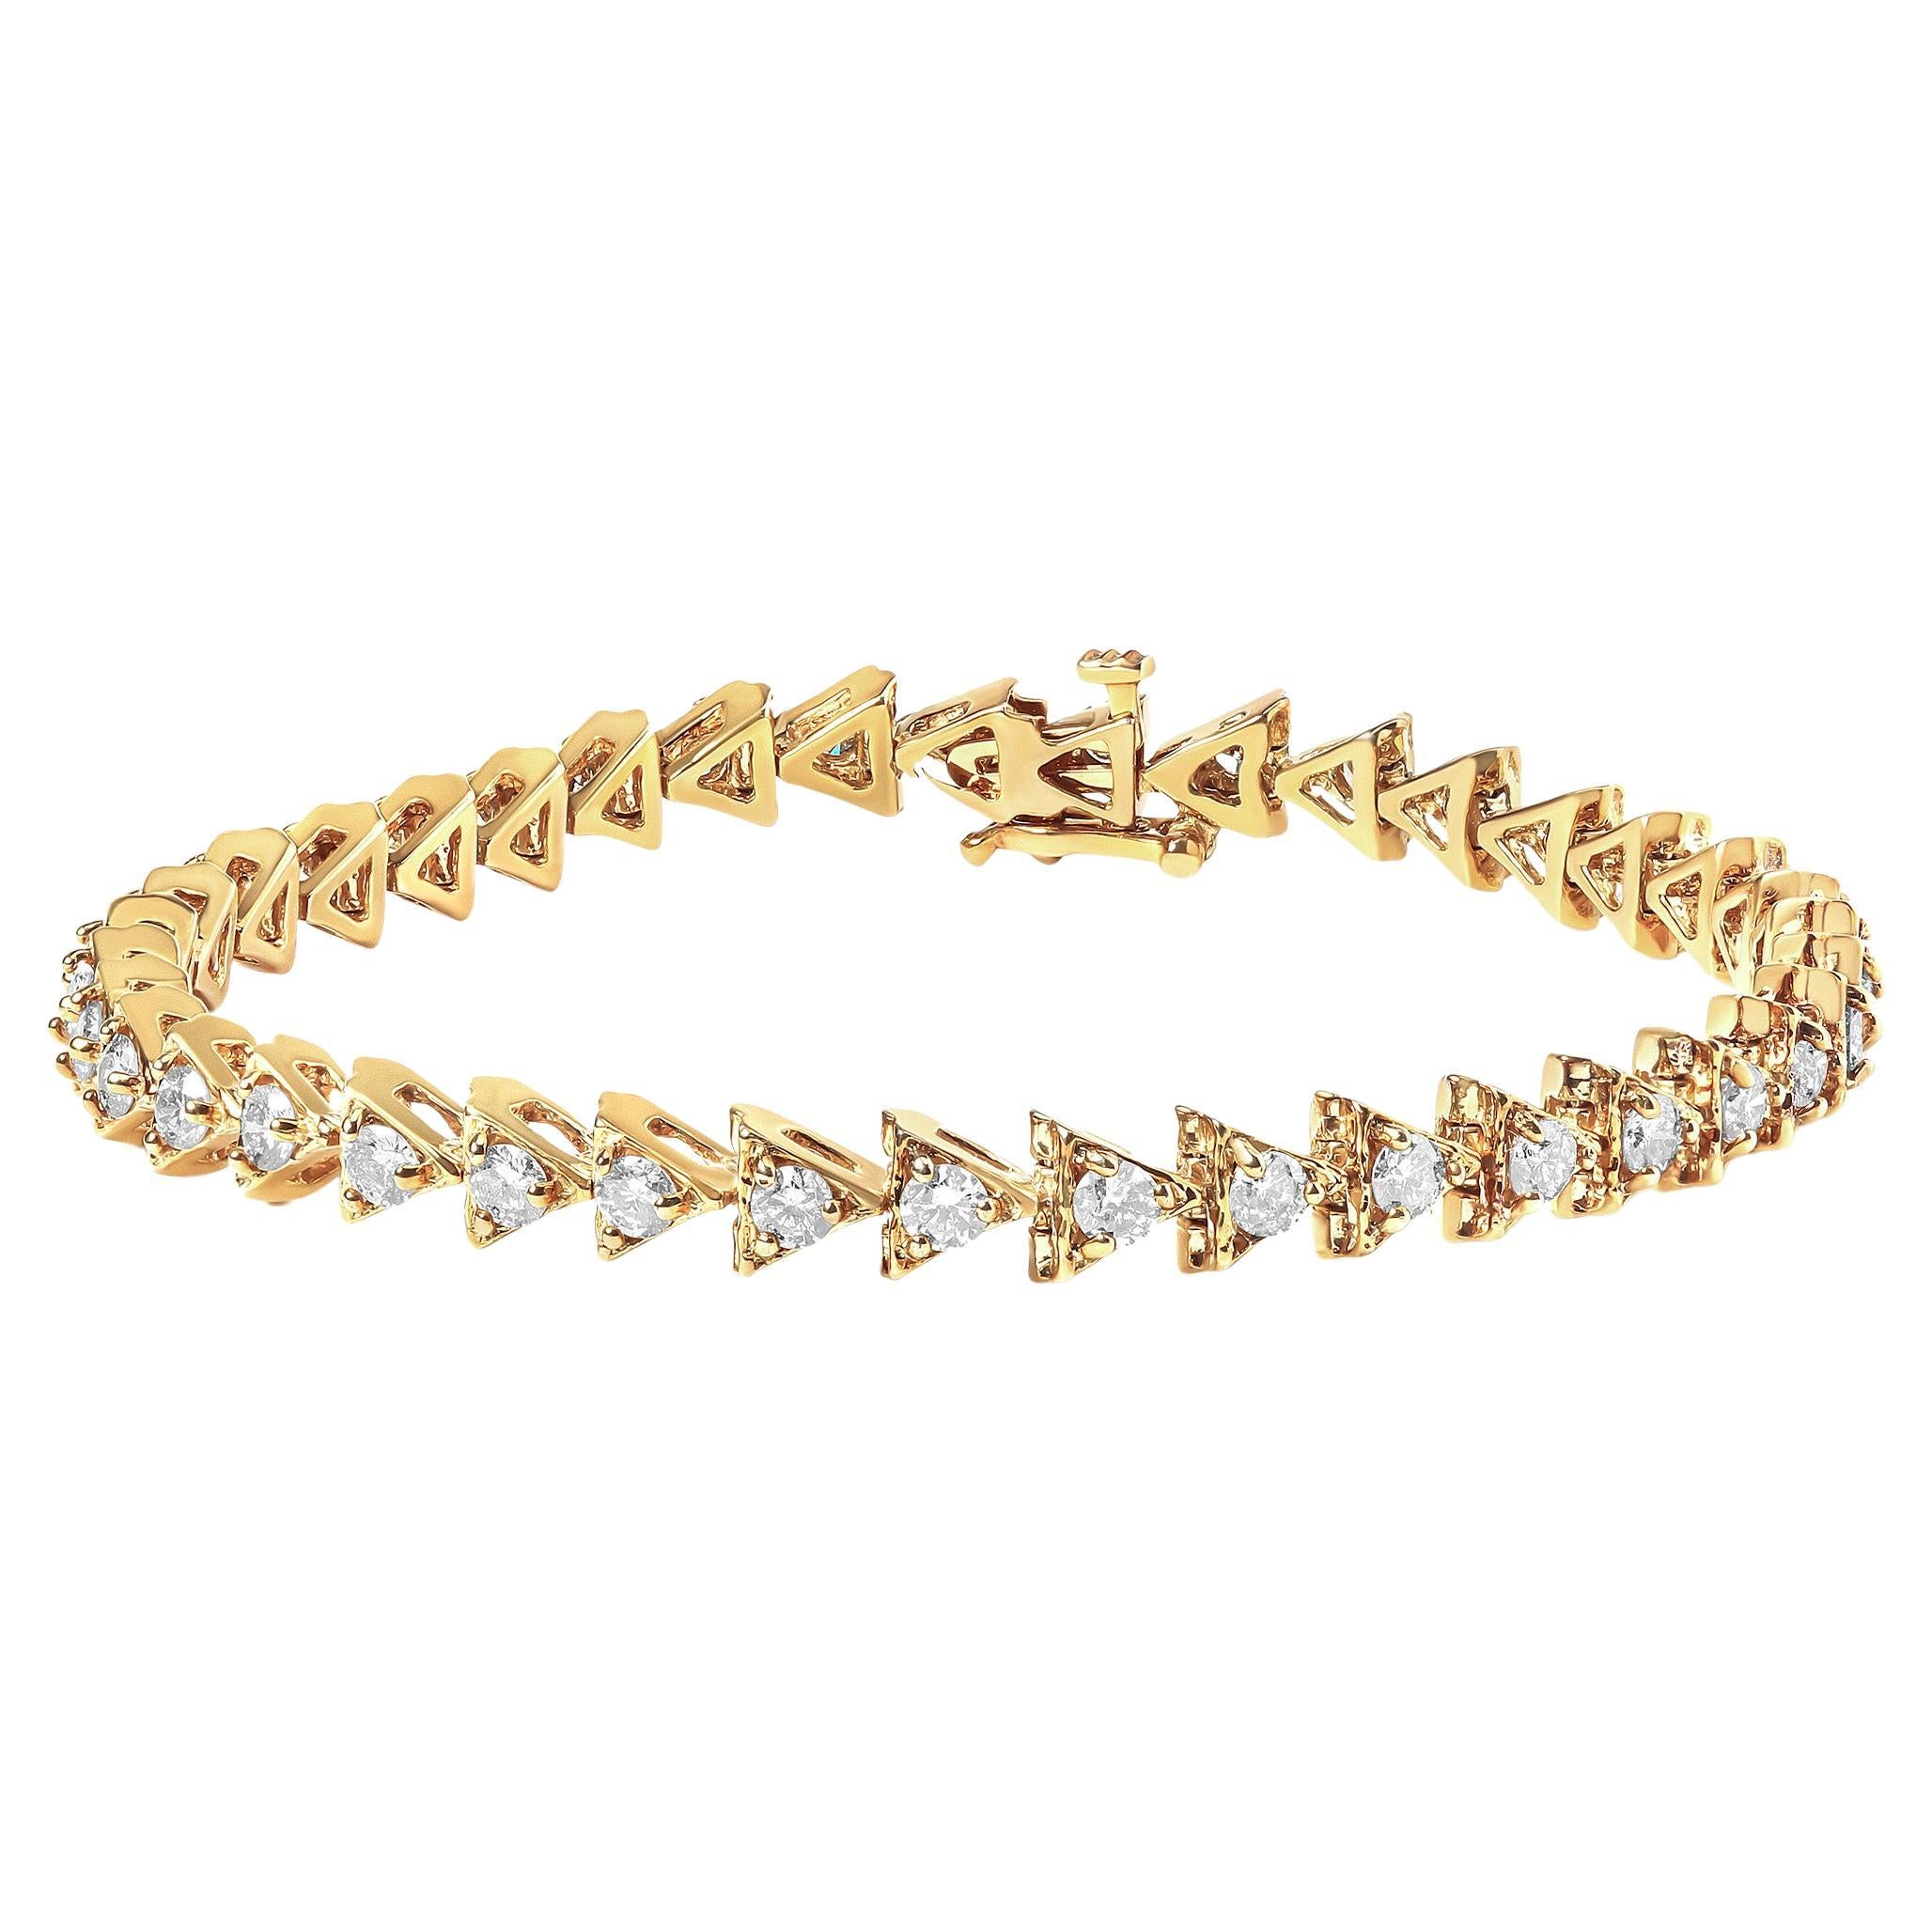 10K Yellow Gold Over Silver 3.0 Carat Diamond Triangle Link Tennis Bracelet For Sale